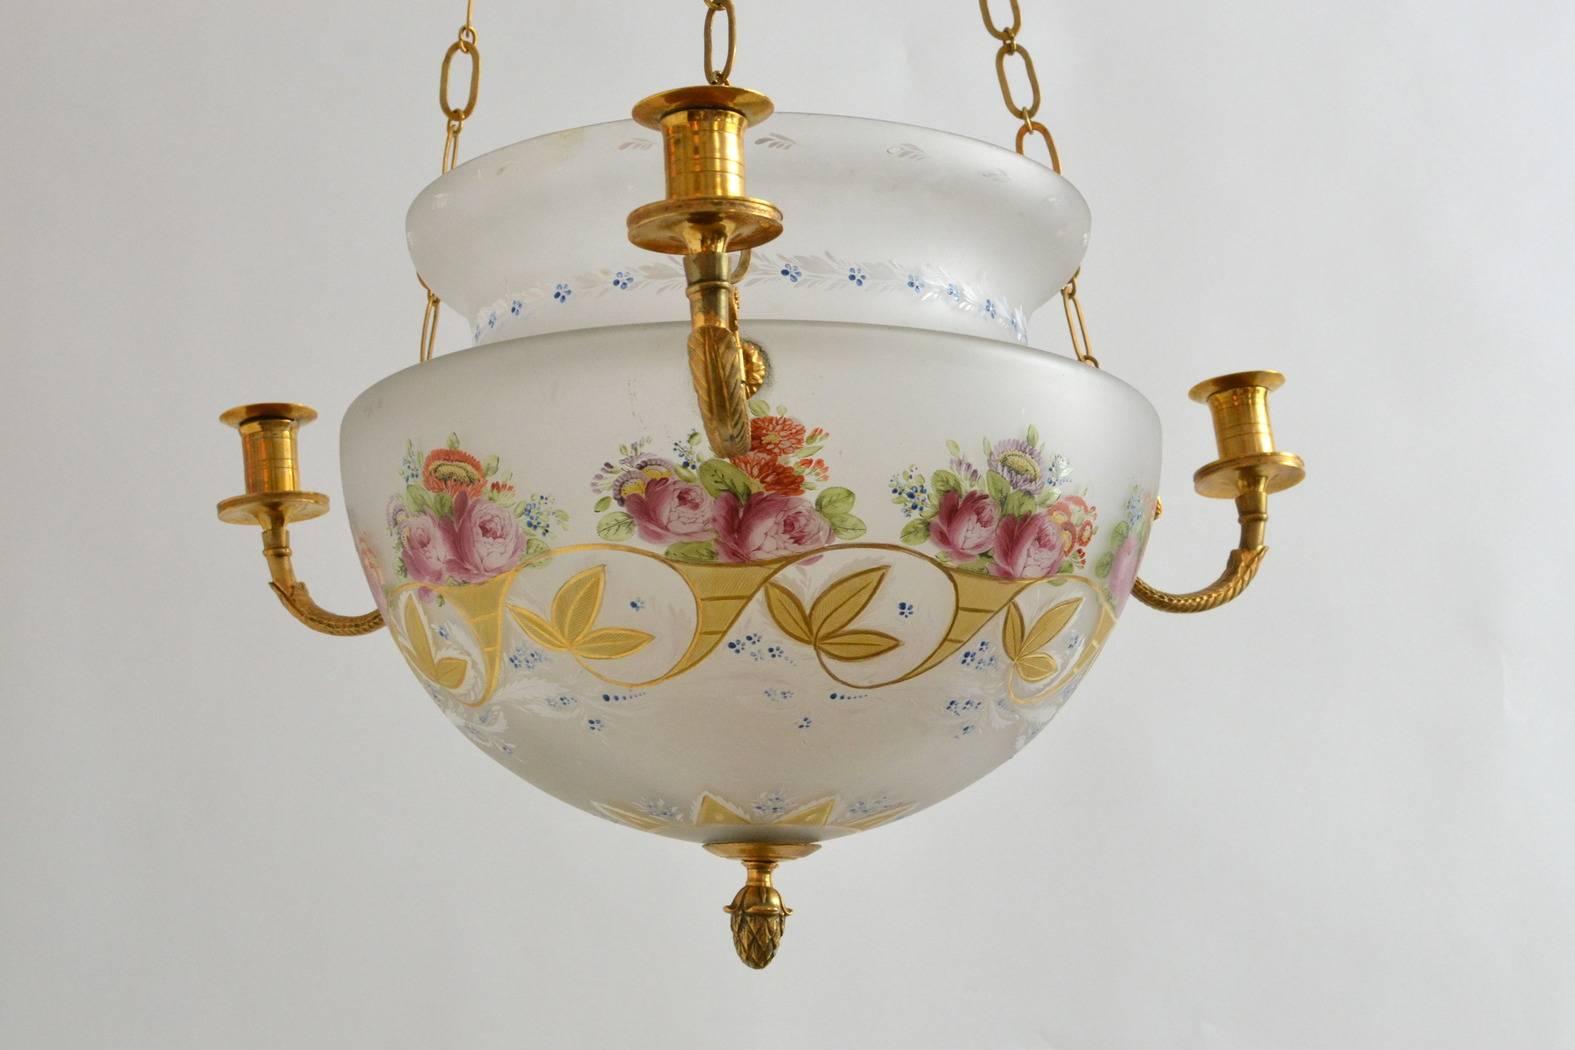 A Swedish painted glass Empire hanging lantern/lamp, early 19th century with three candleholders and arms.